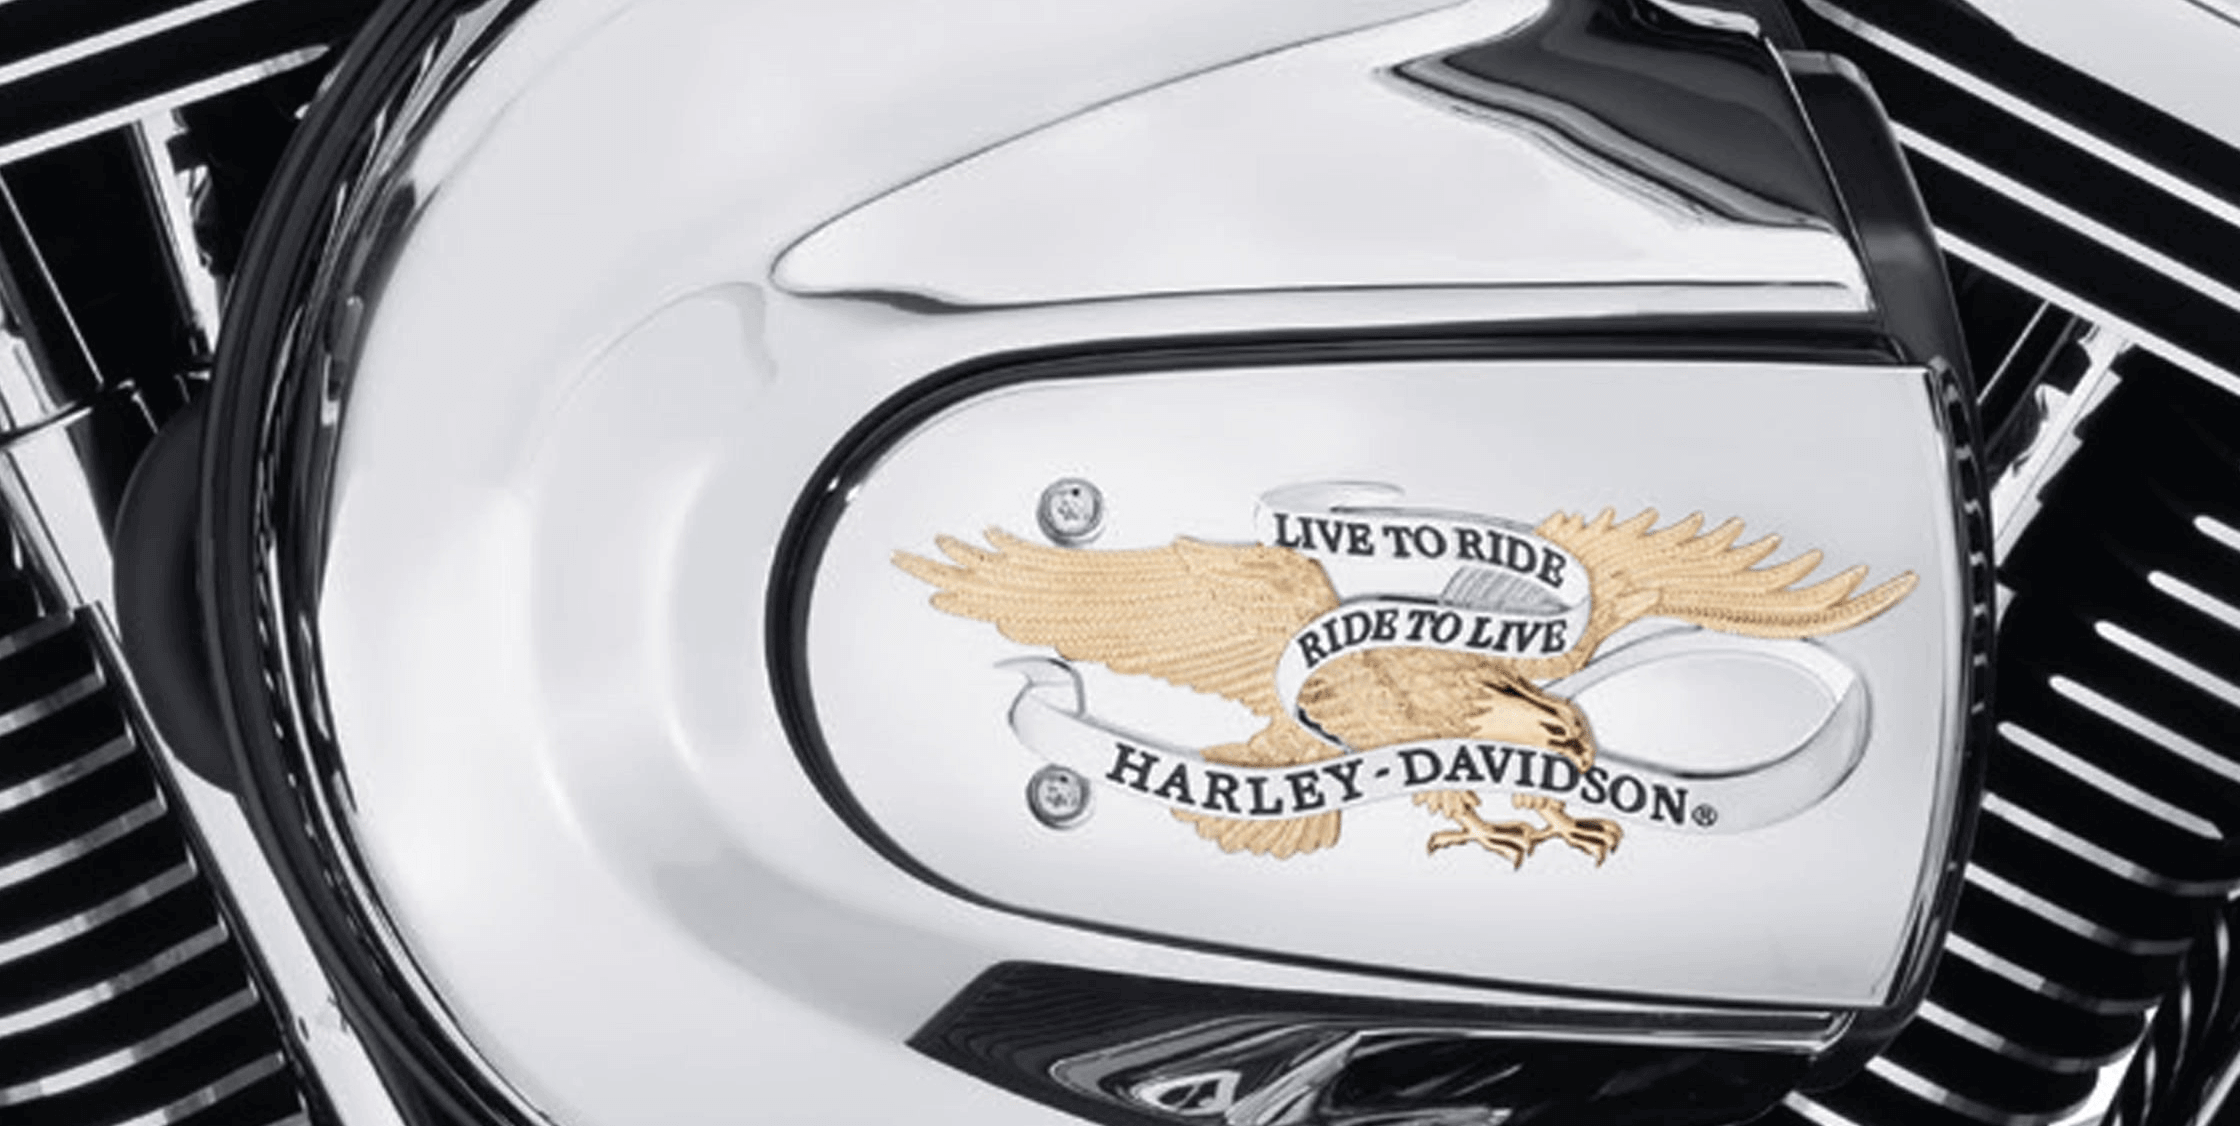 “Live to ride, ride to live” (Harley Davidson)